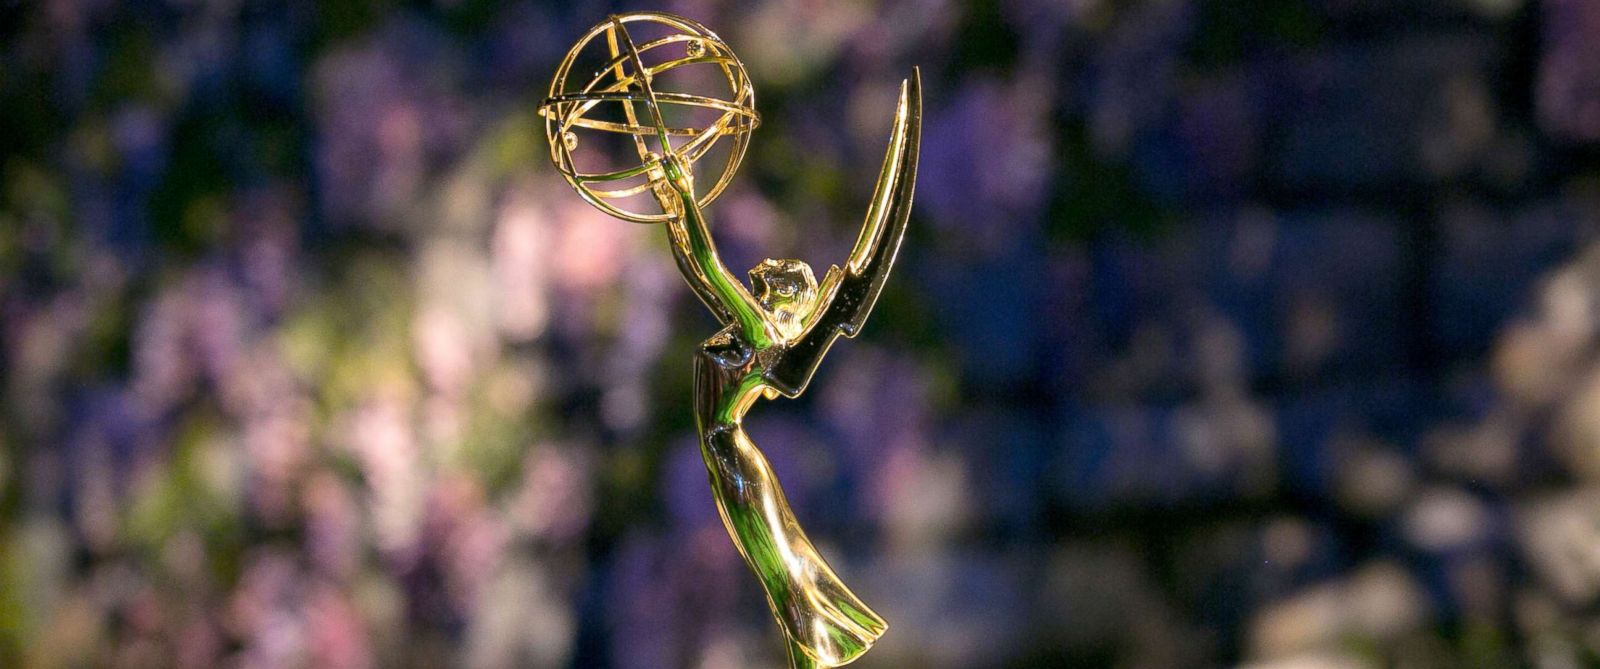 Congratulations to our Emmy nominees!